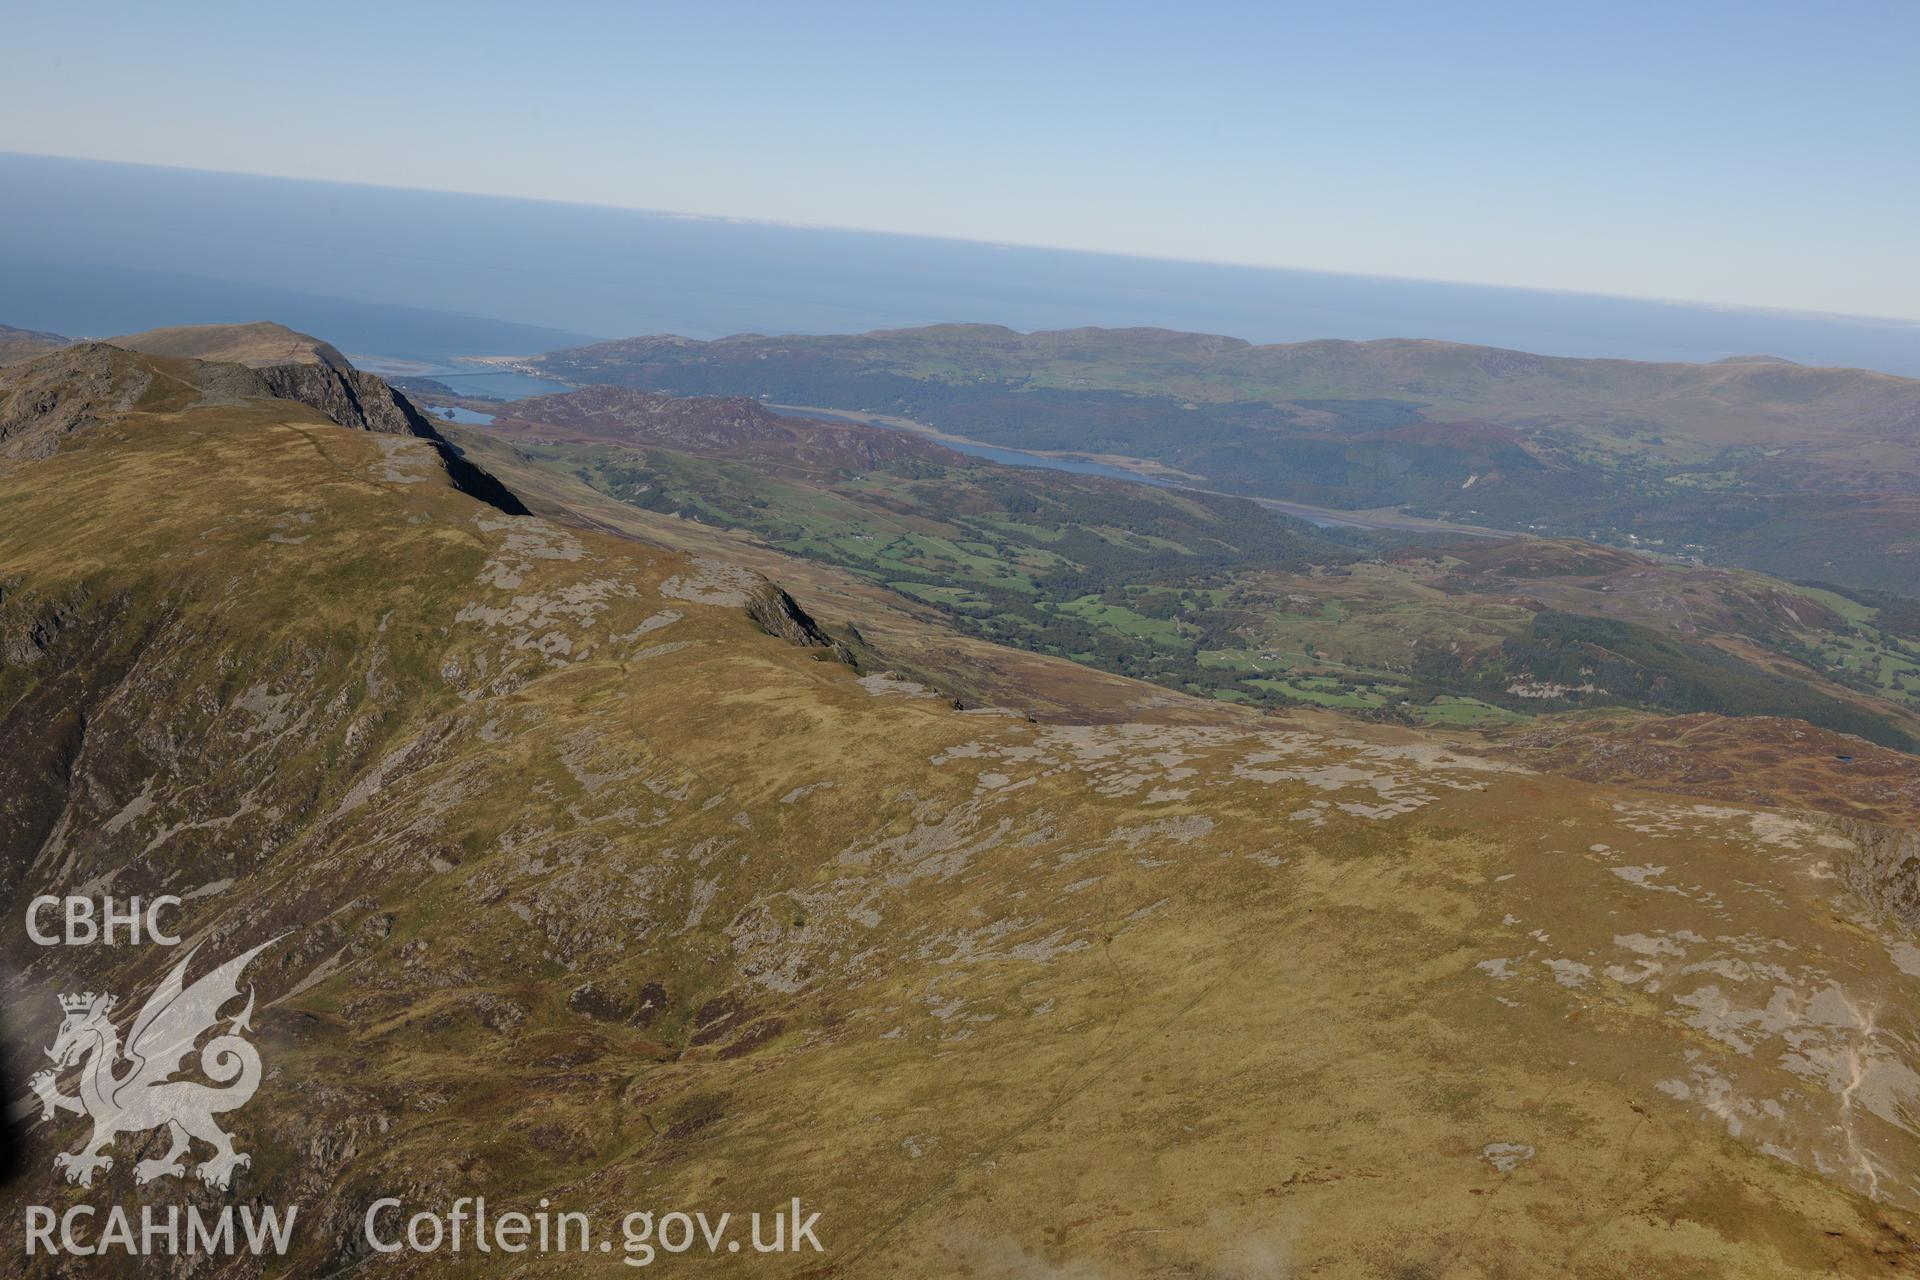 Cadair Idris with the Mawddach estuary beyond. Oblique aerial photograph taken during the Royal Commission's programme of archaeological aerial reconnaissance by Toby Driver on 2nd October 2015.